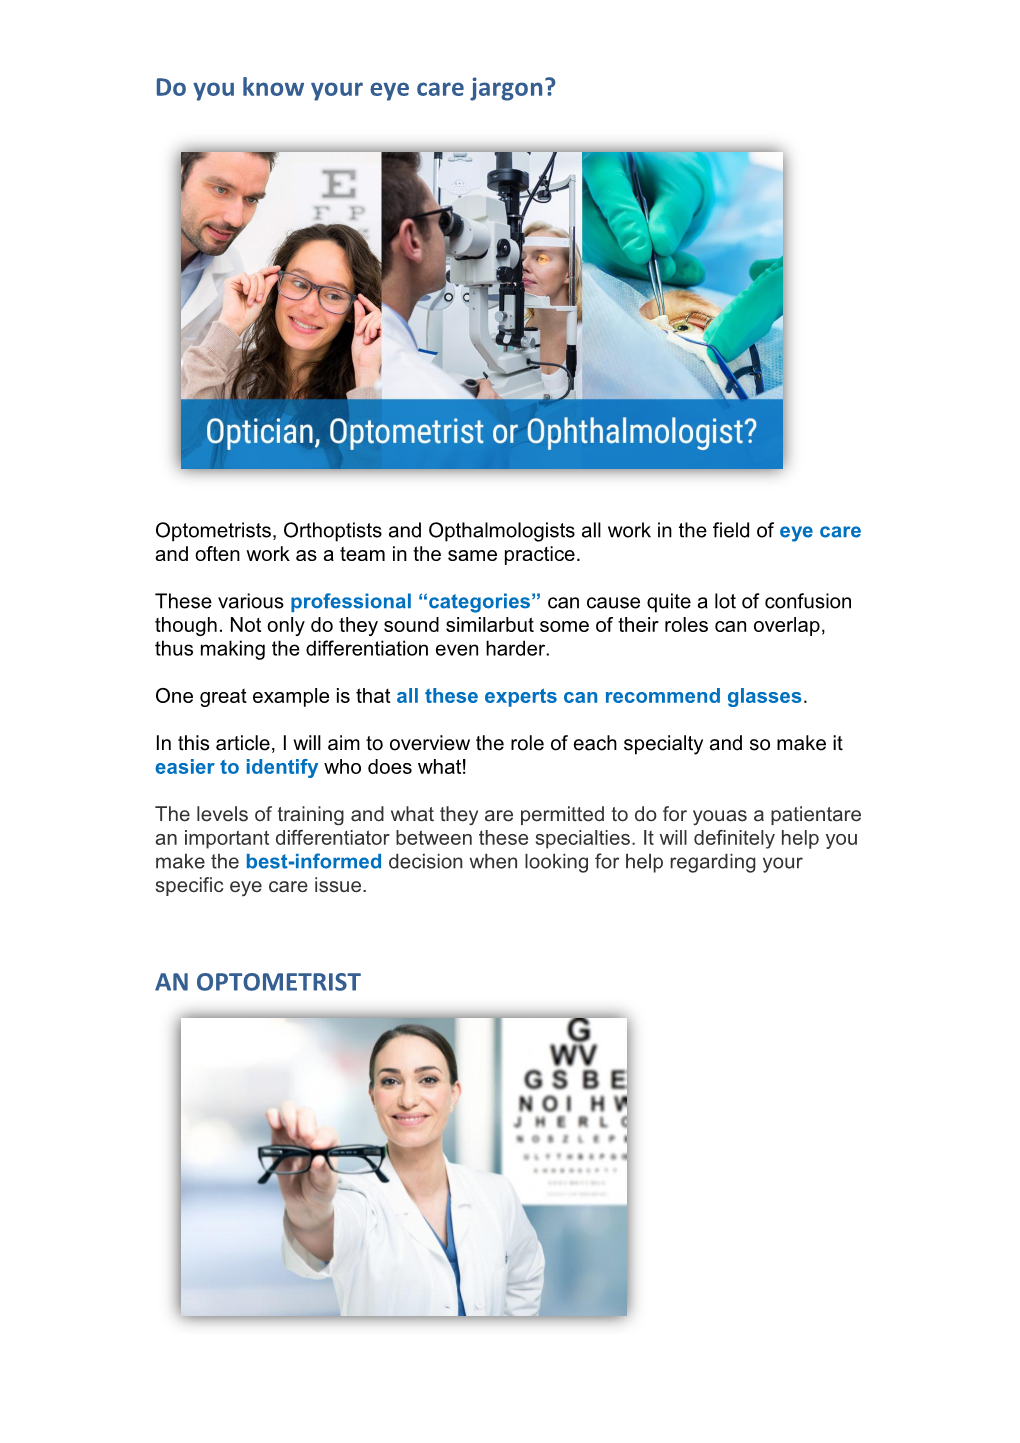 Do You Know Your Eye Care Jargon? an OPTOMETRIST